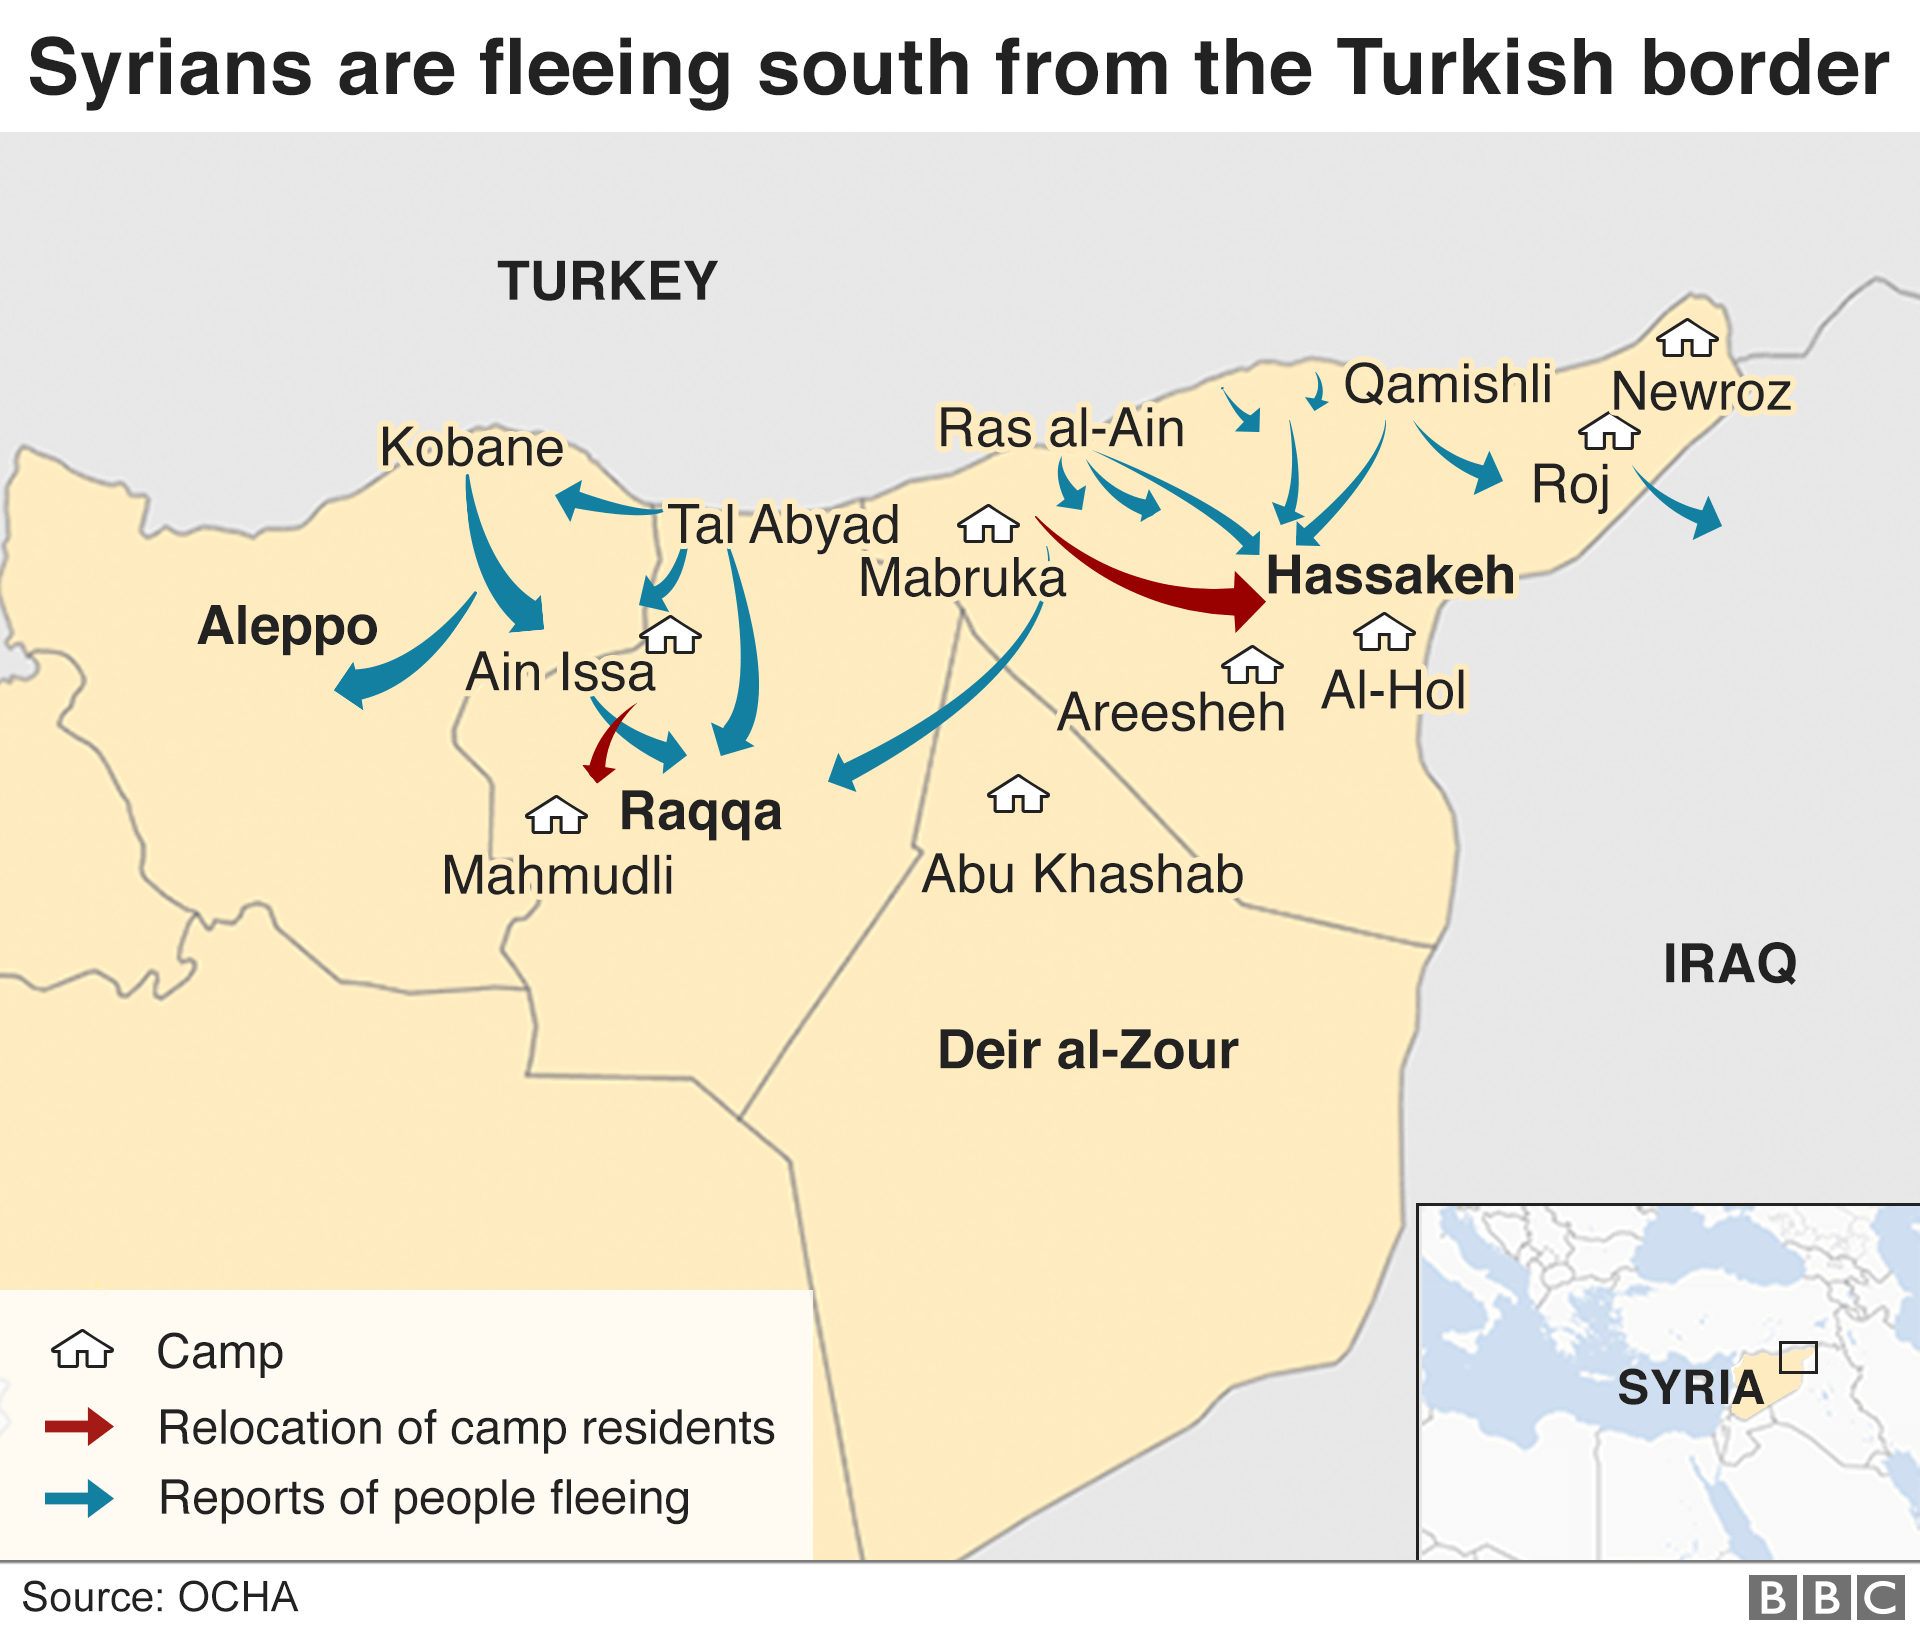 Map showing where Syrians are fleeing from in northern Syria